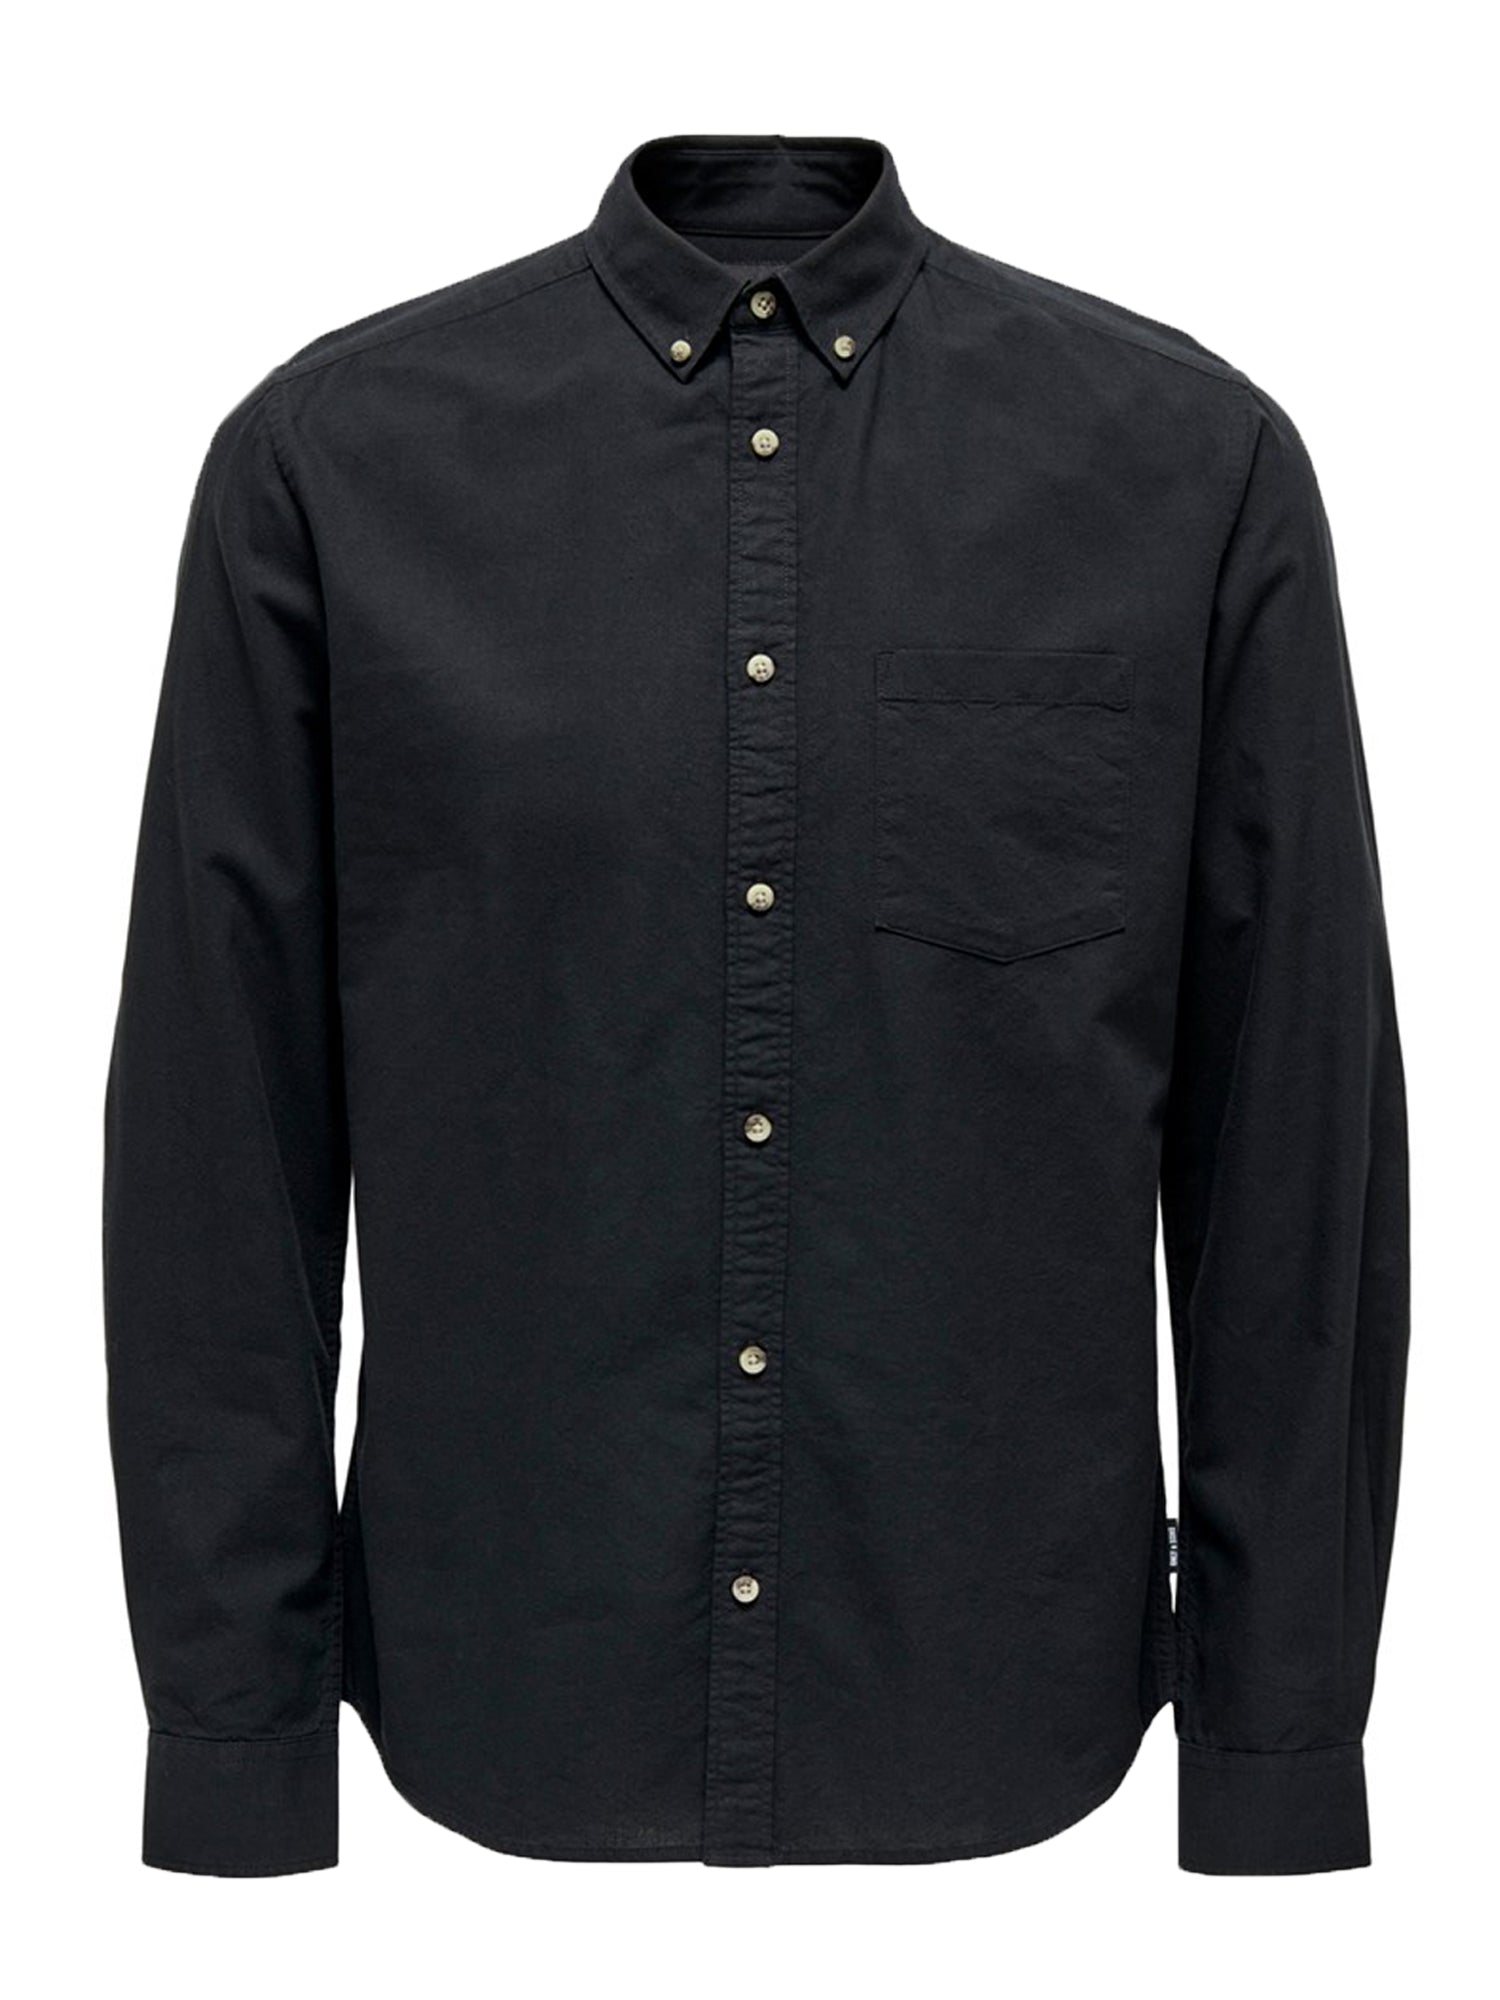 ONLY&SONS CAMICIA CASUAL NERO